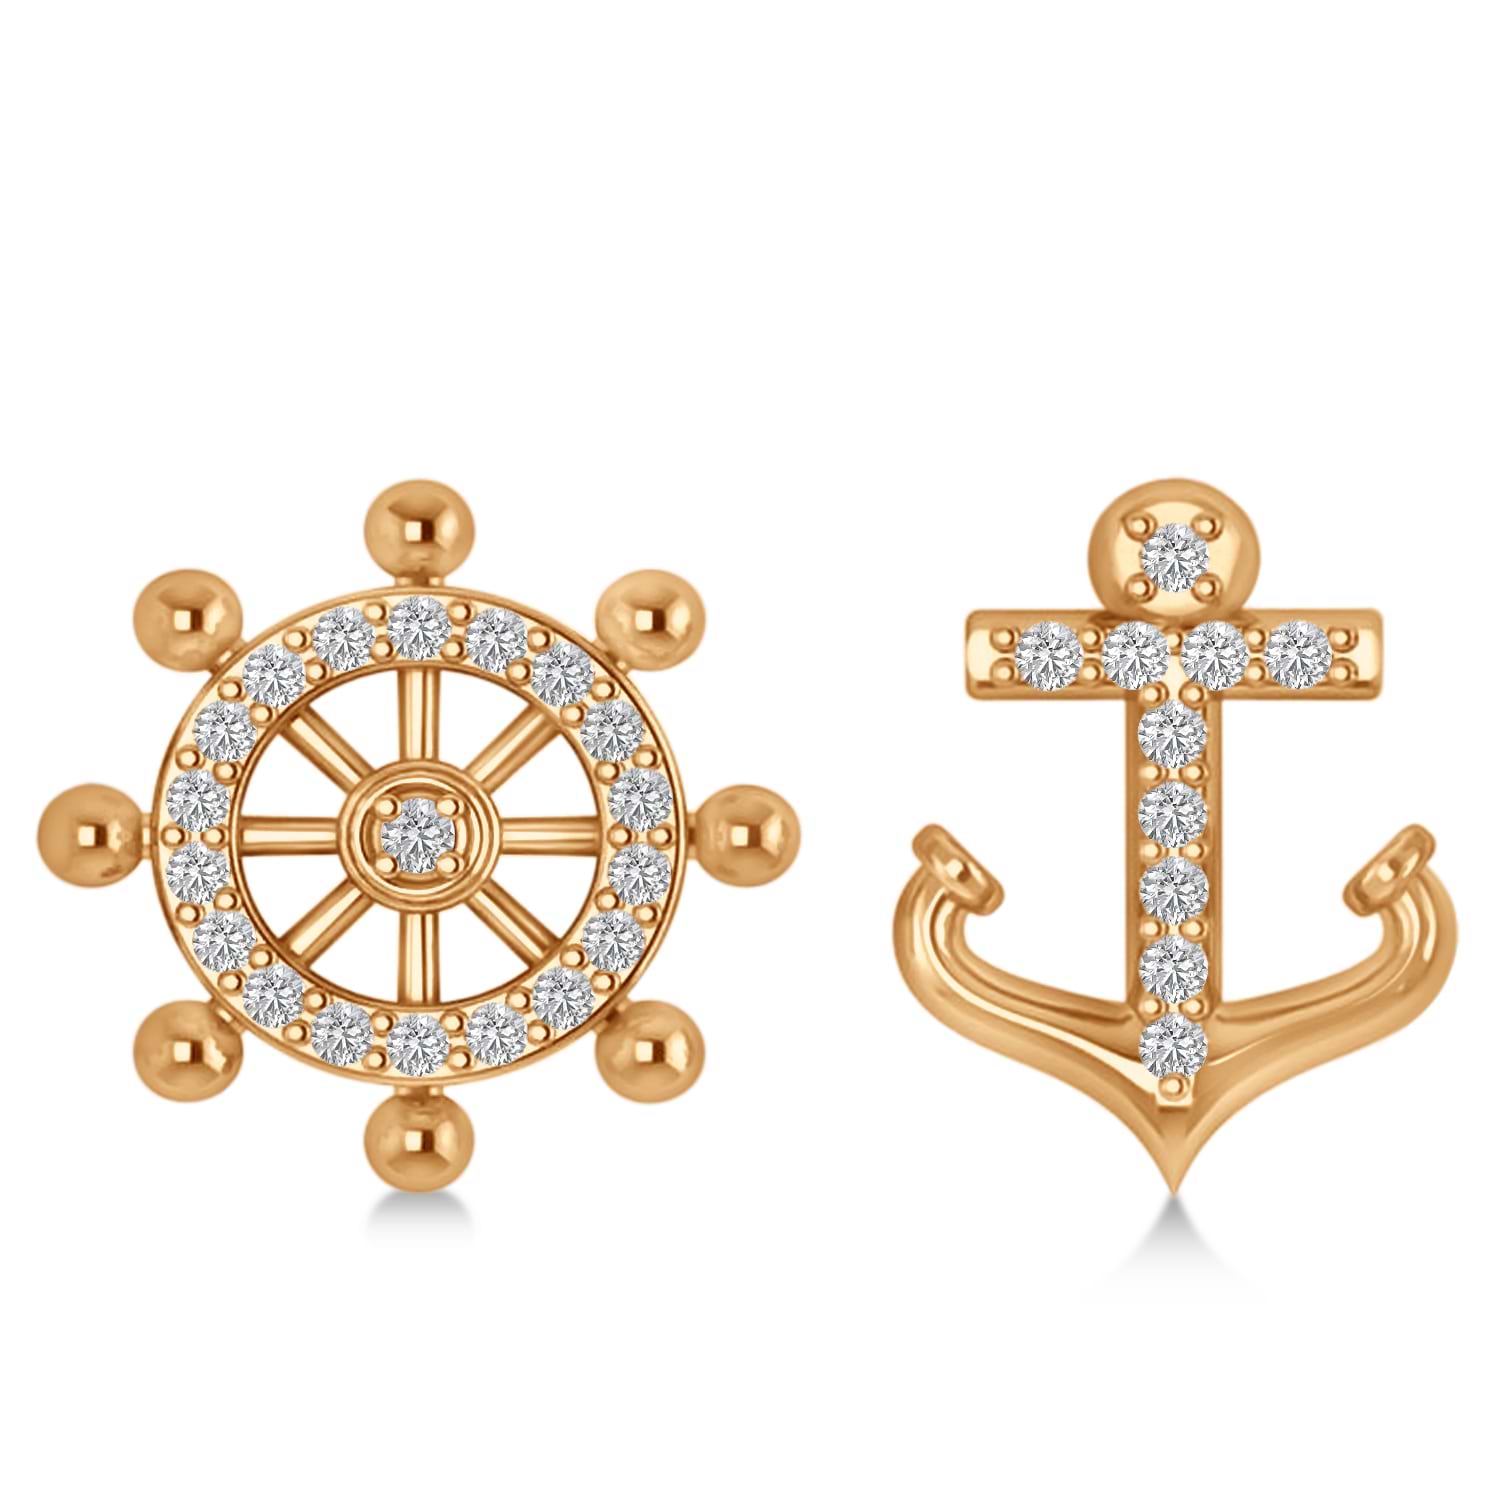 Anchor & Ship's Wheel Diamond Mismatched Earrings 14k Rose Gold (0.21ct)